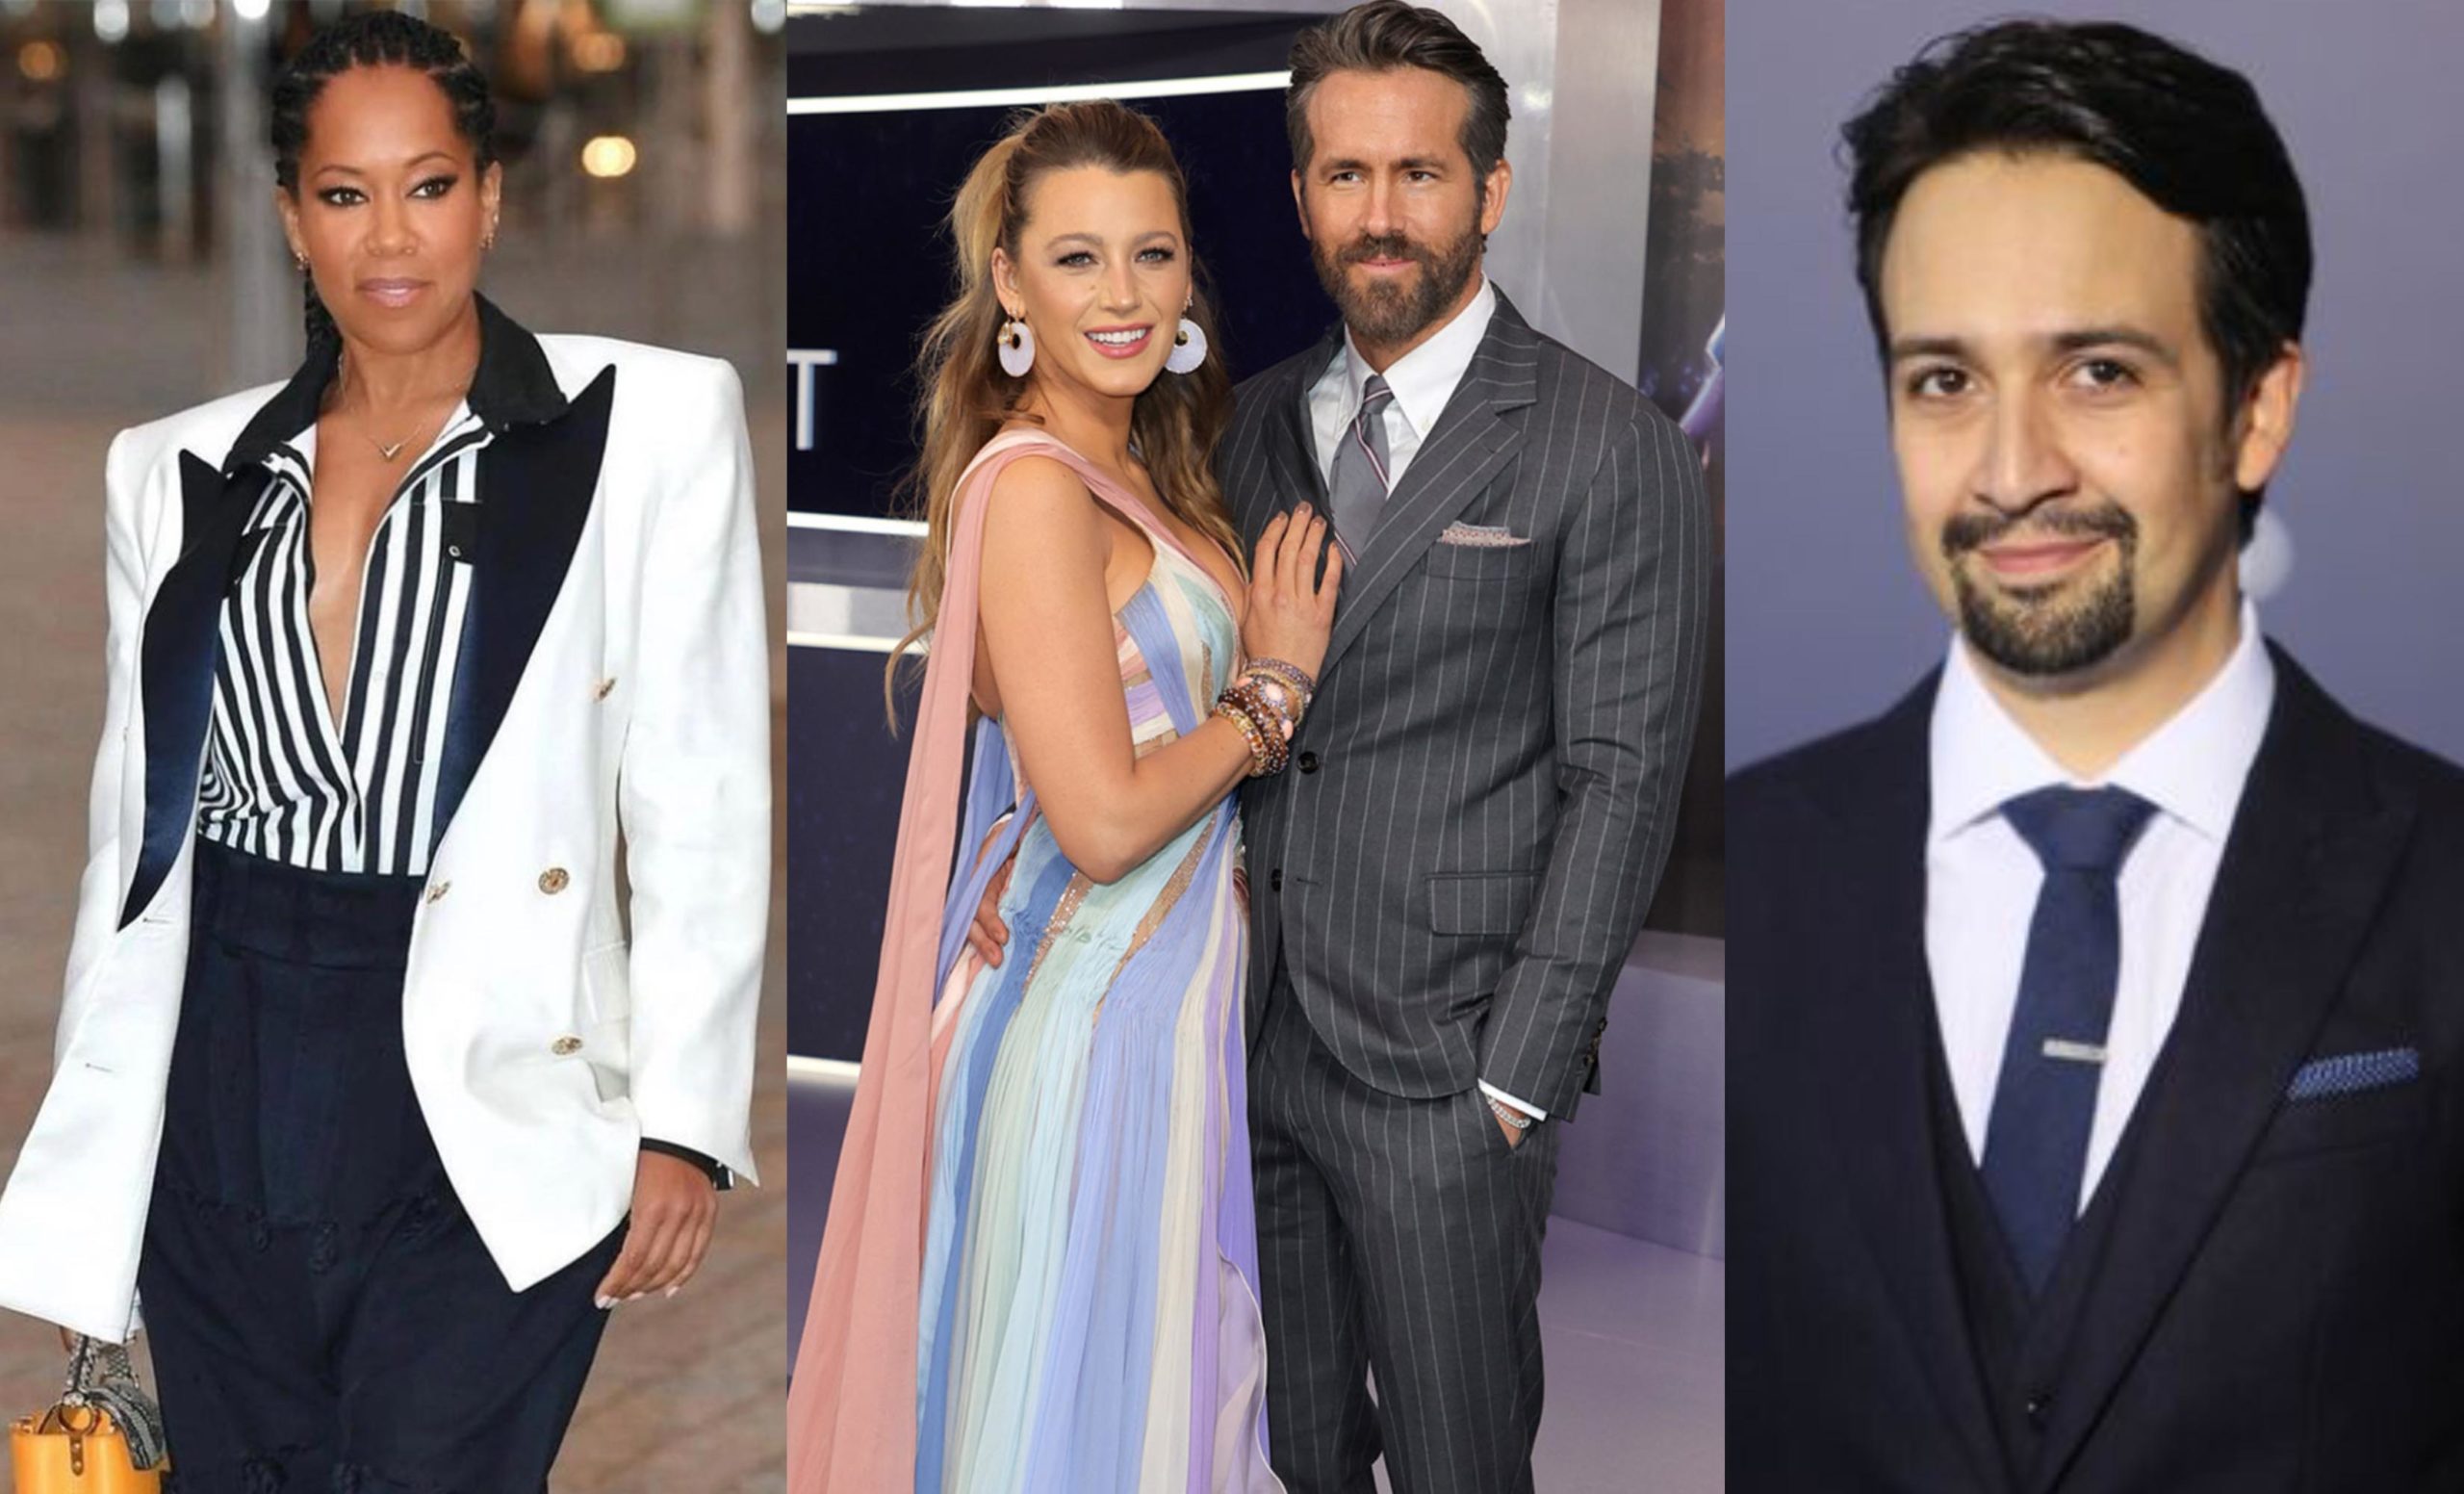 Blake Lively And Ryan Reynolds Will Turn Hosts At This Year’s Met Gala. Here’s Who Else Is Joining Them